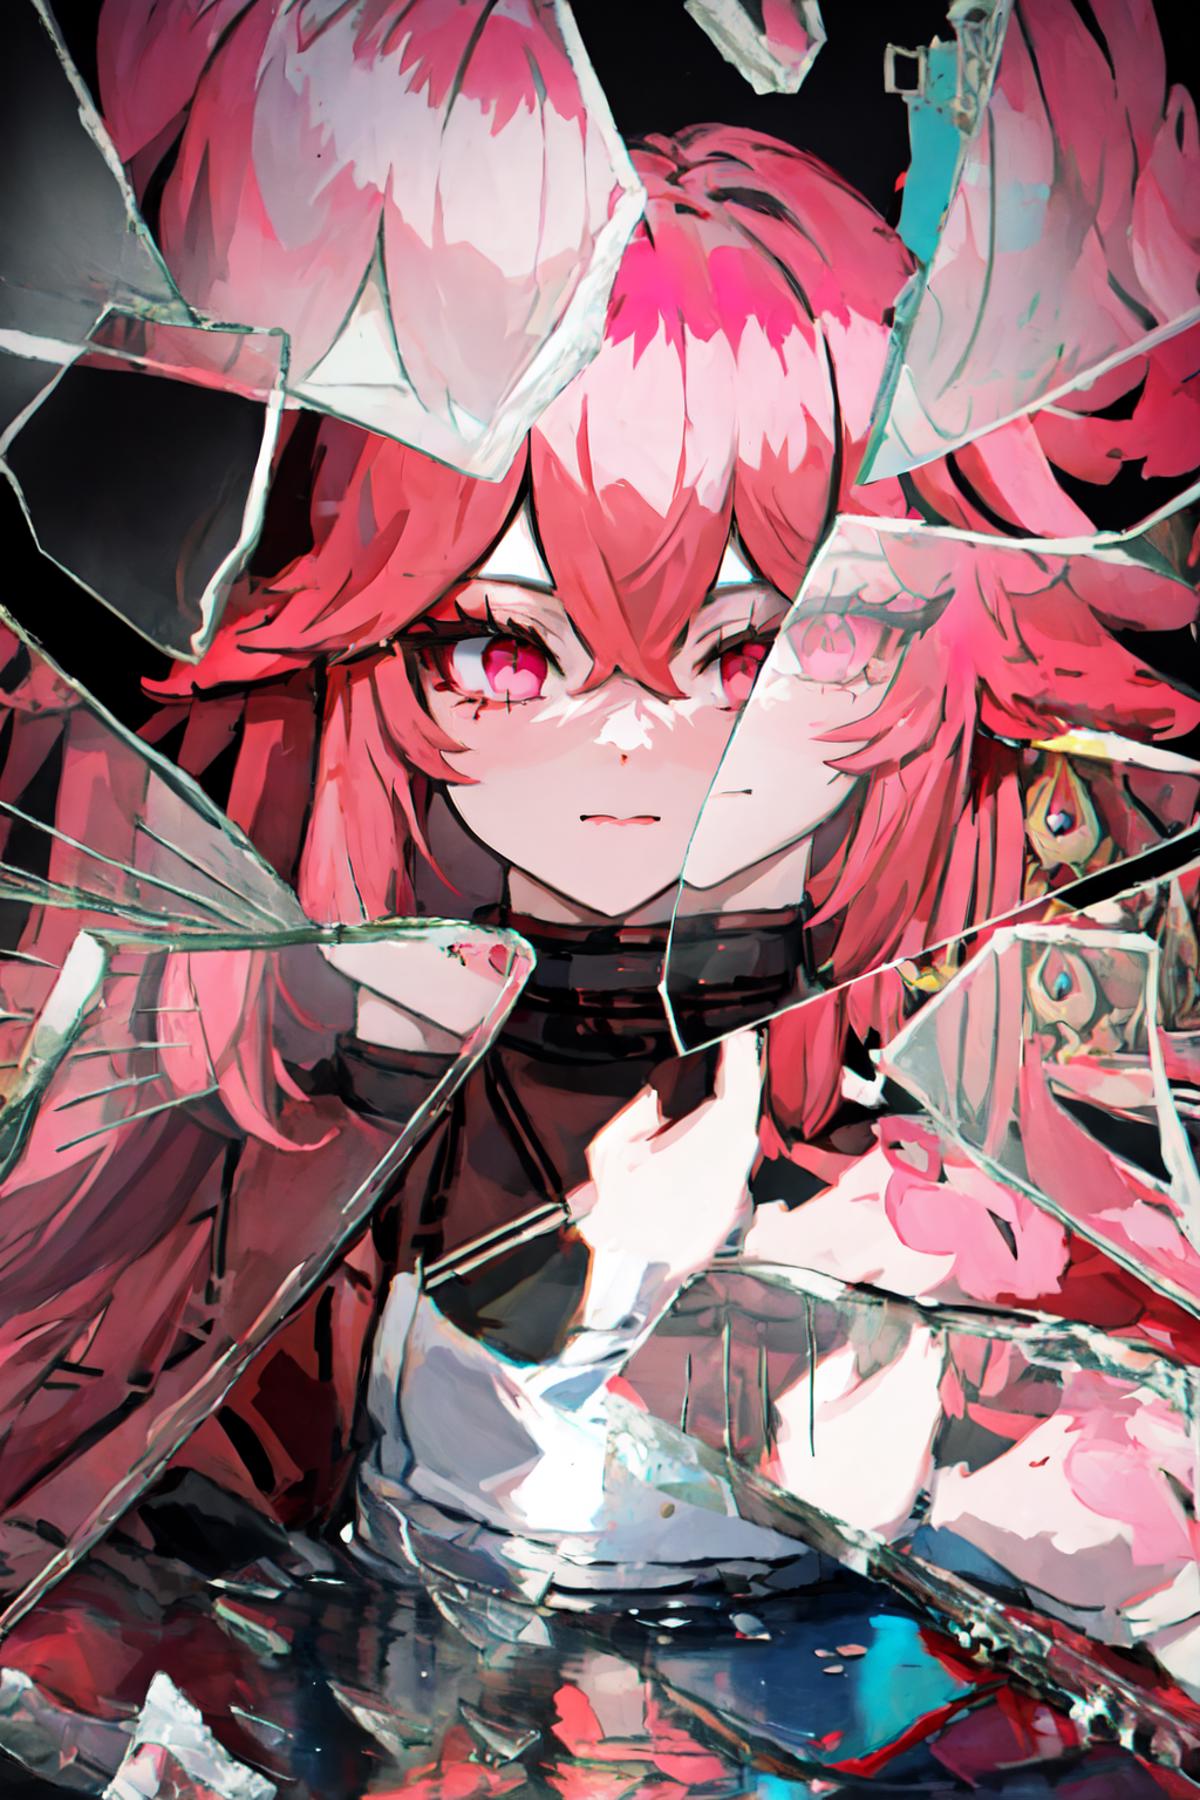 A woman with pink hair and red eyes looking out through a broken mirror.